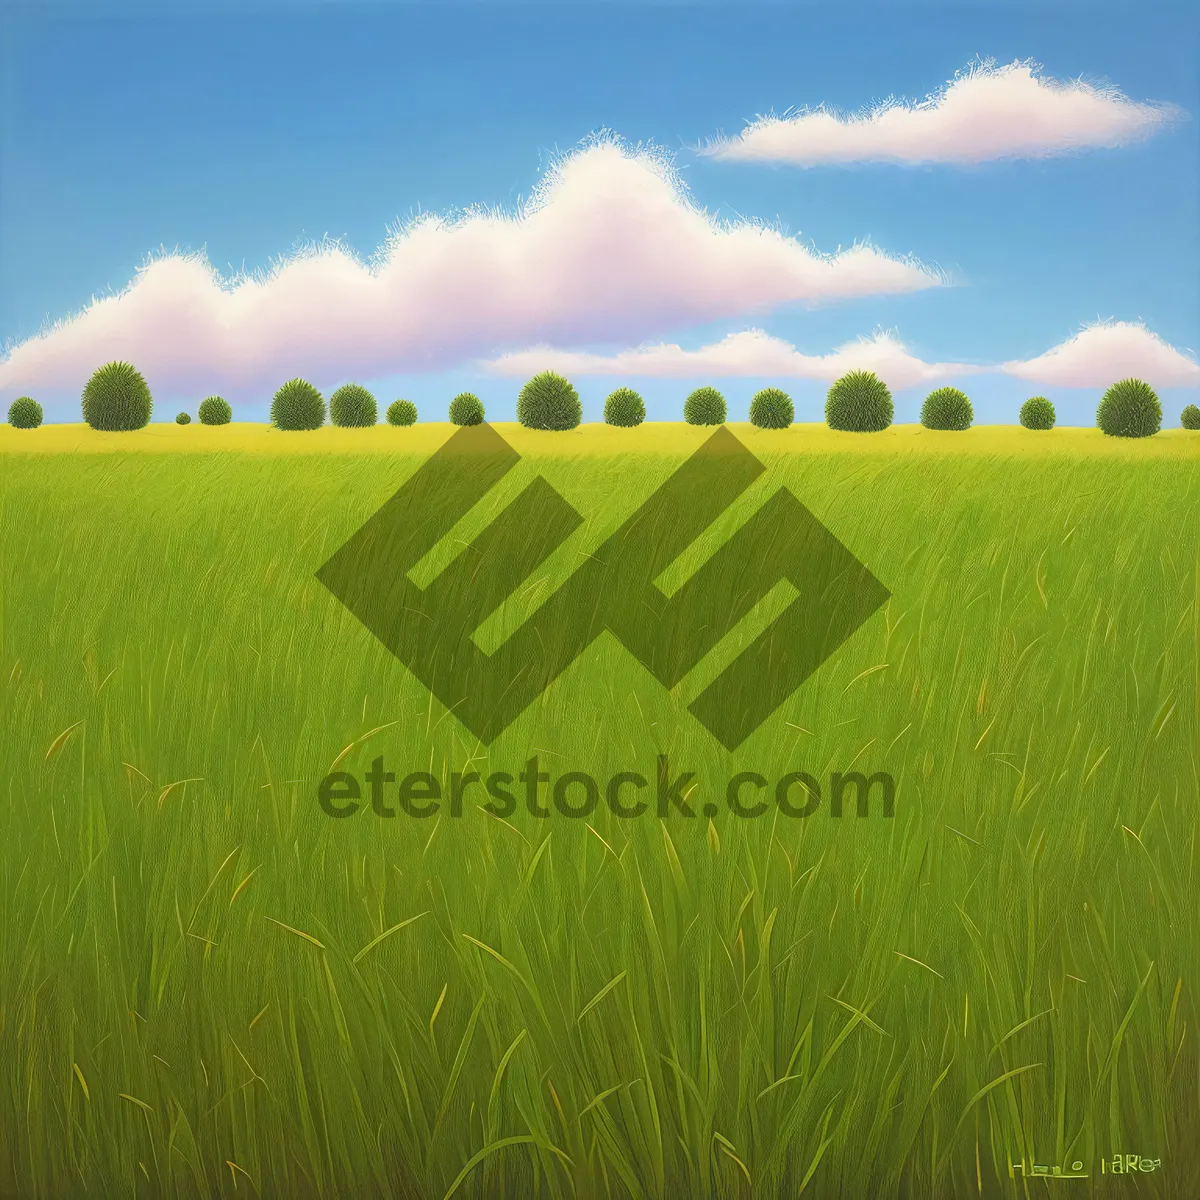 Picture of Vibrant summer meadow beneath a clear blue sky